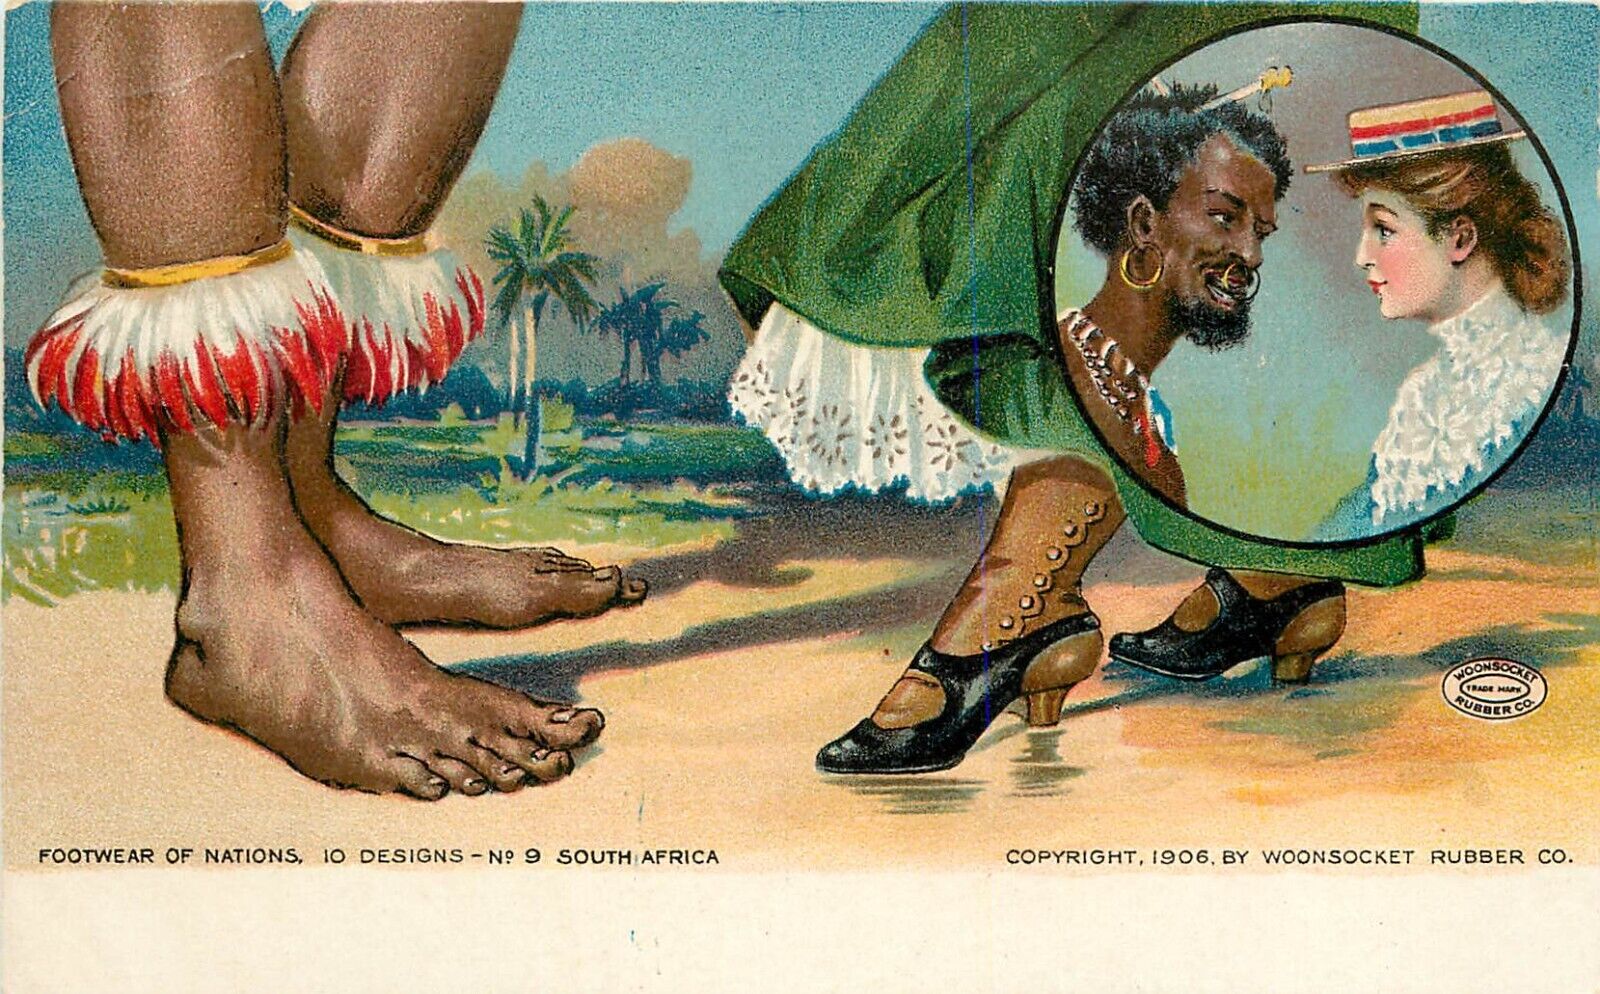 1906 Postcard Ad Woonsocket Rubber Co. Footwear of Nations South Africa Unposted